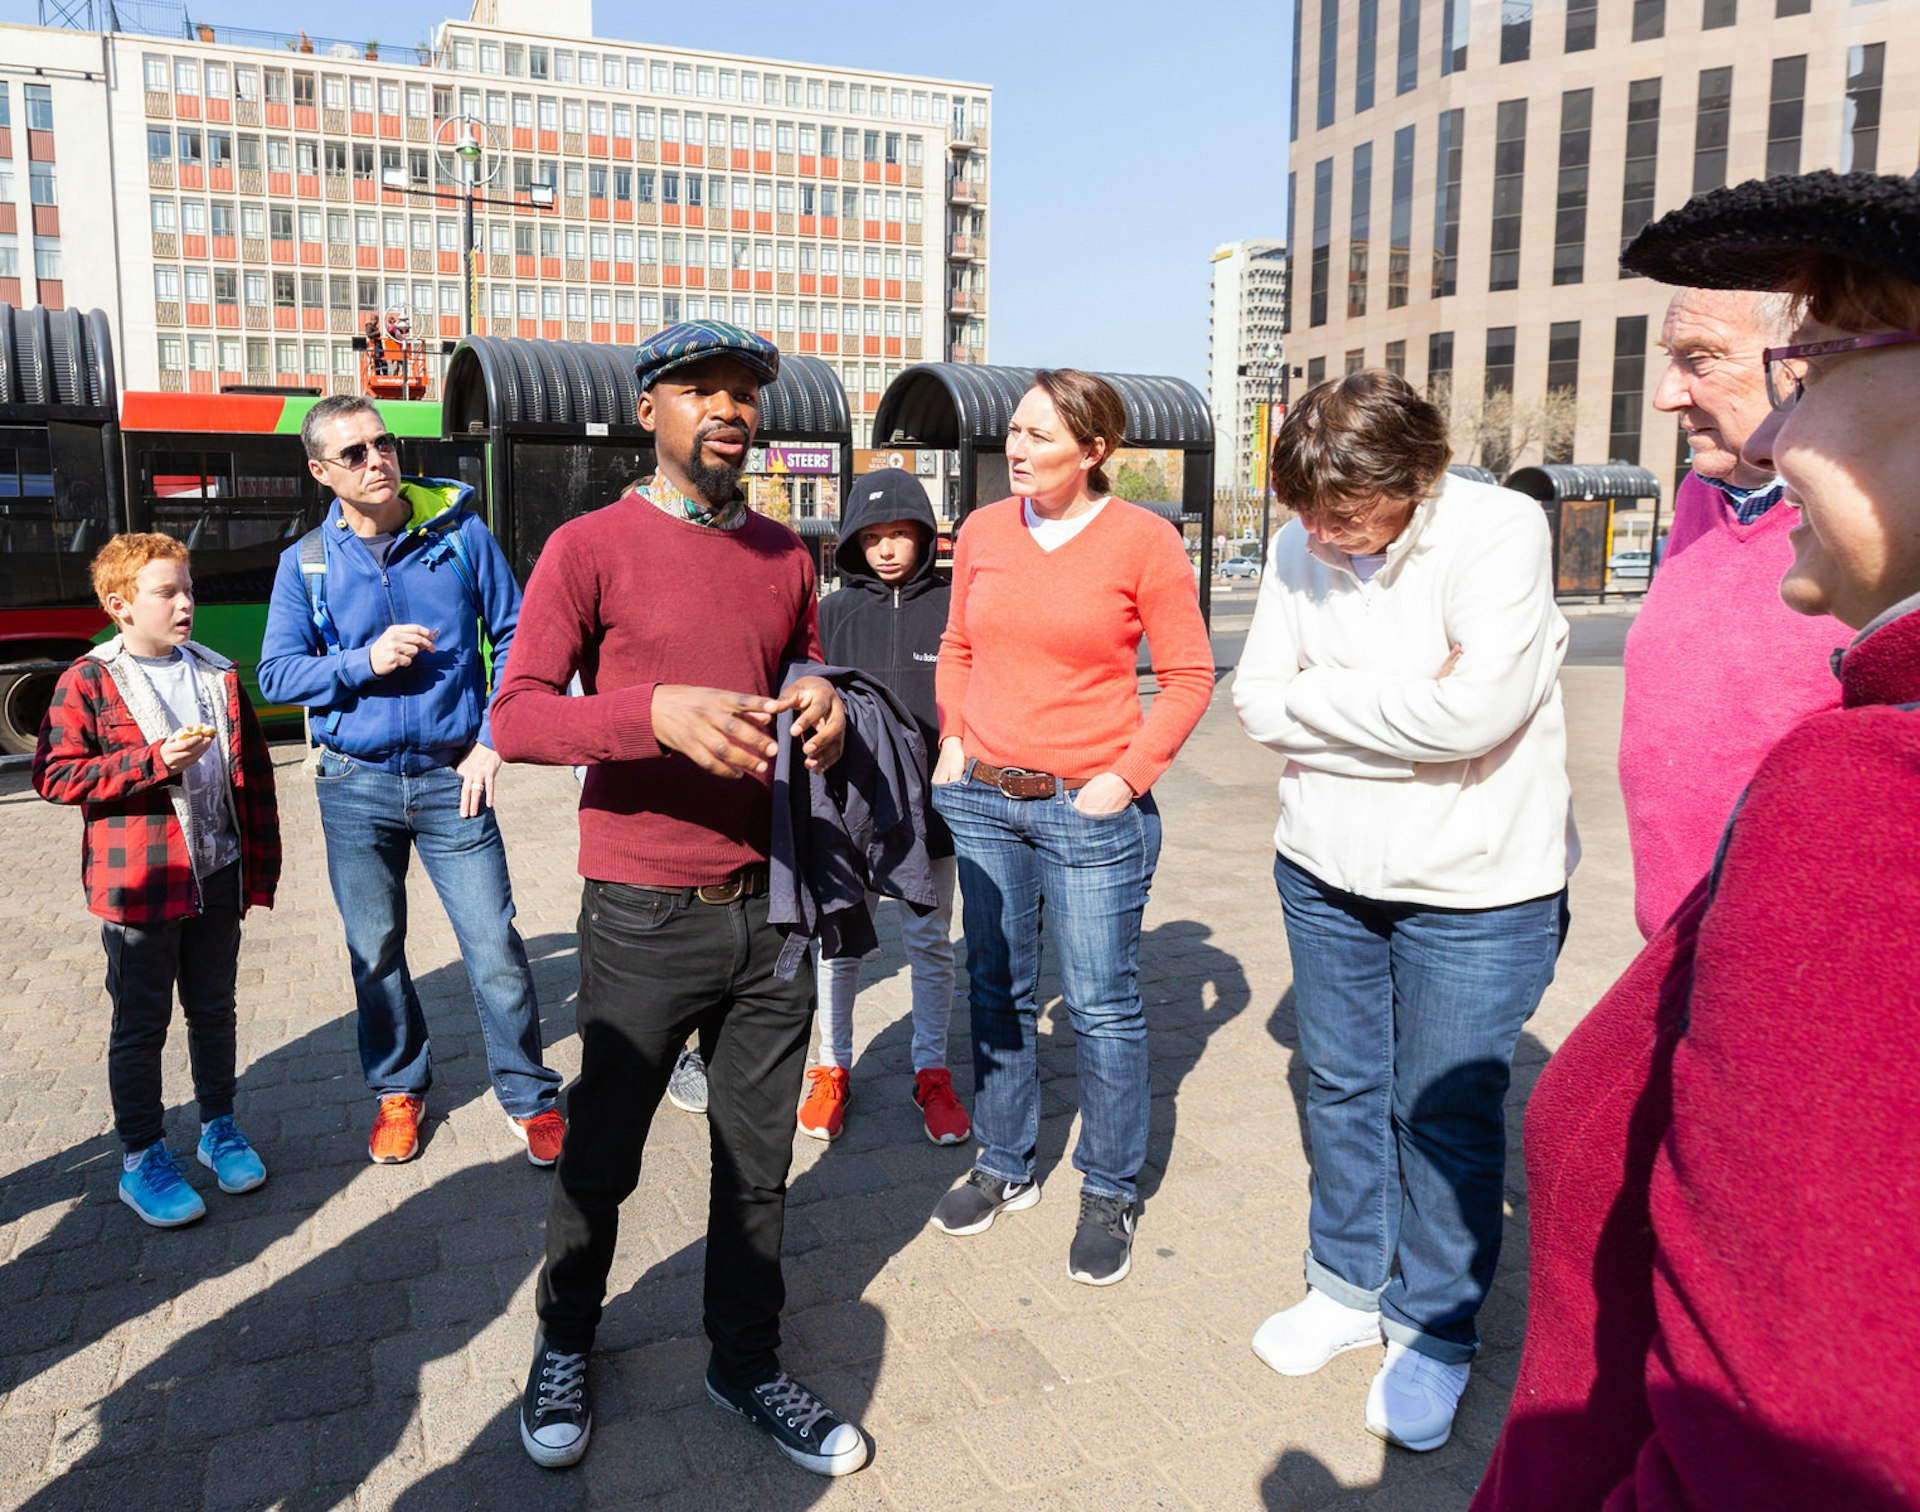 A black South African guide stands in downtown with a group of visitors on one of JoburgPlaces' Johannesburg walking tours © Heather Mason / Lonely Planet